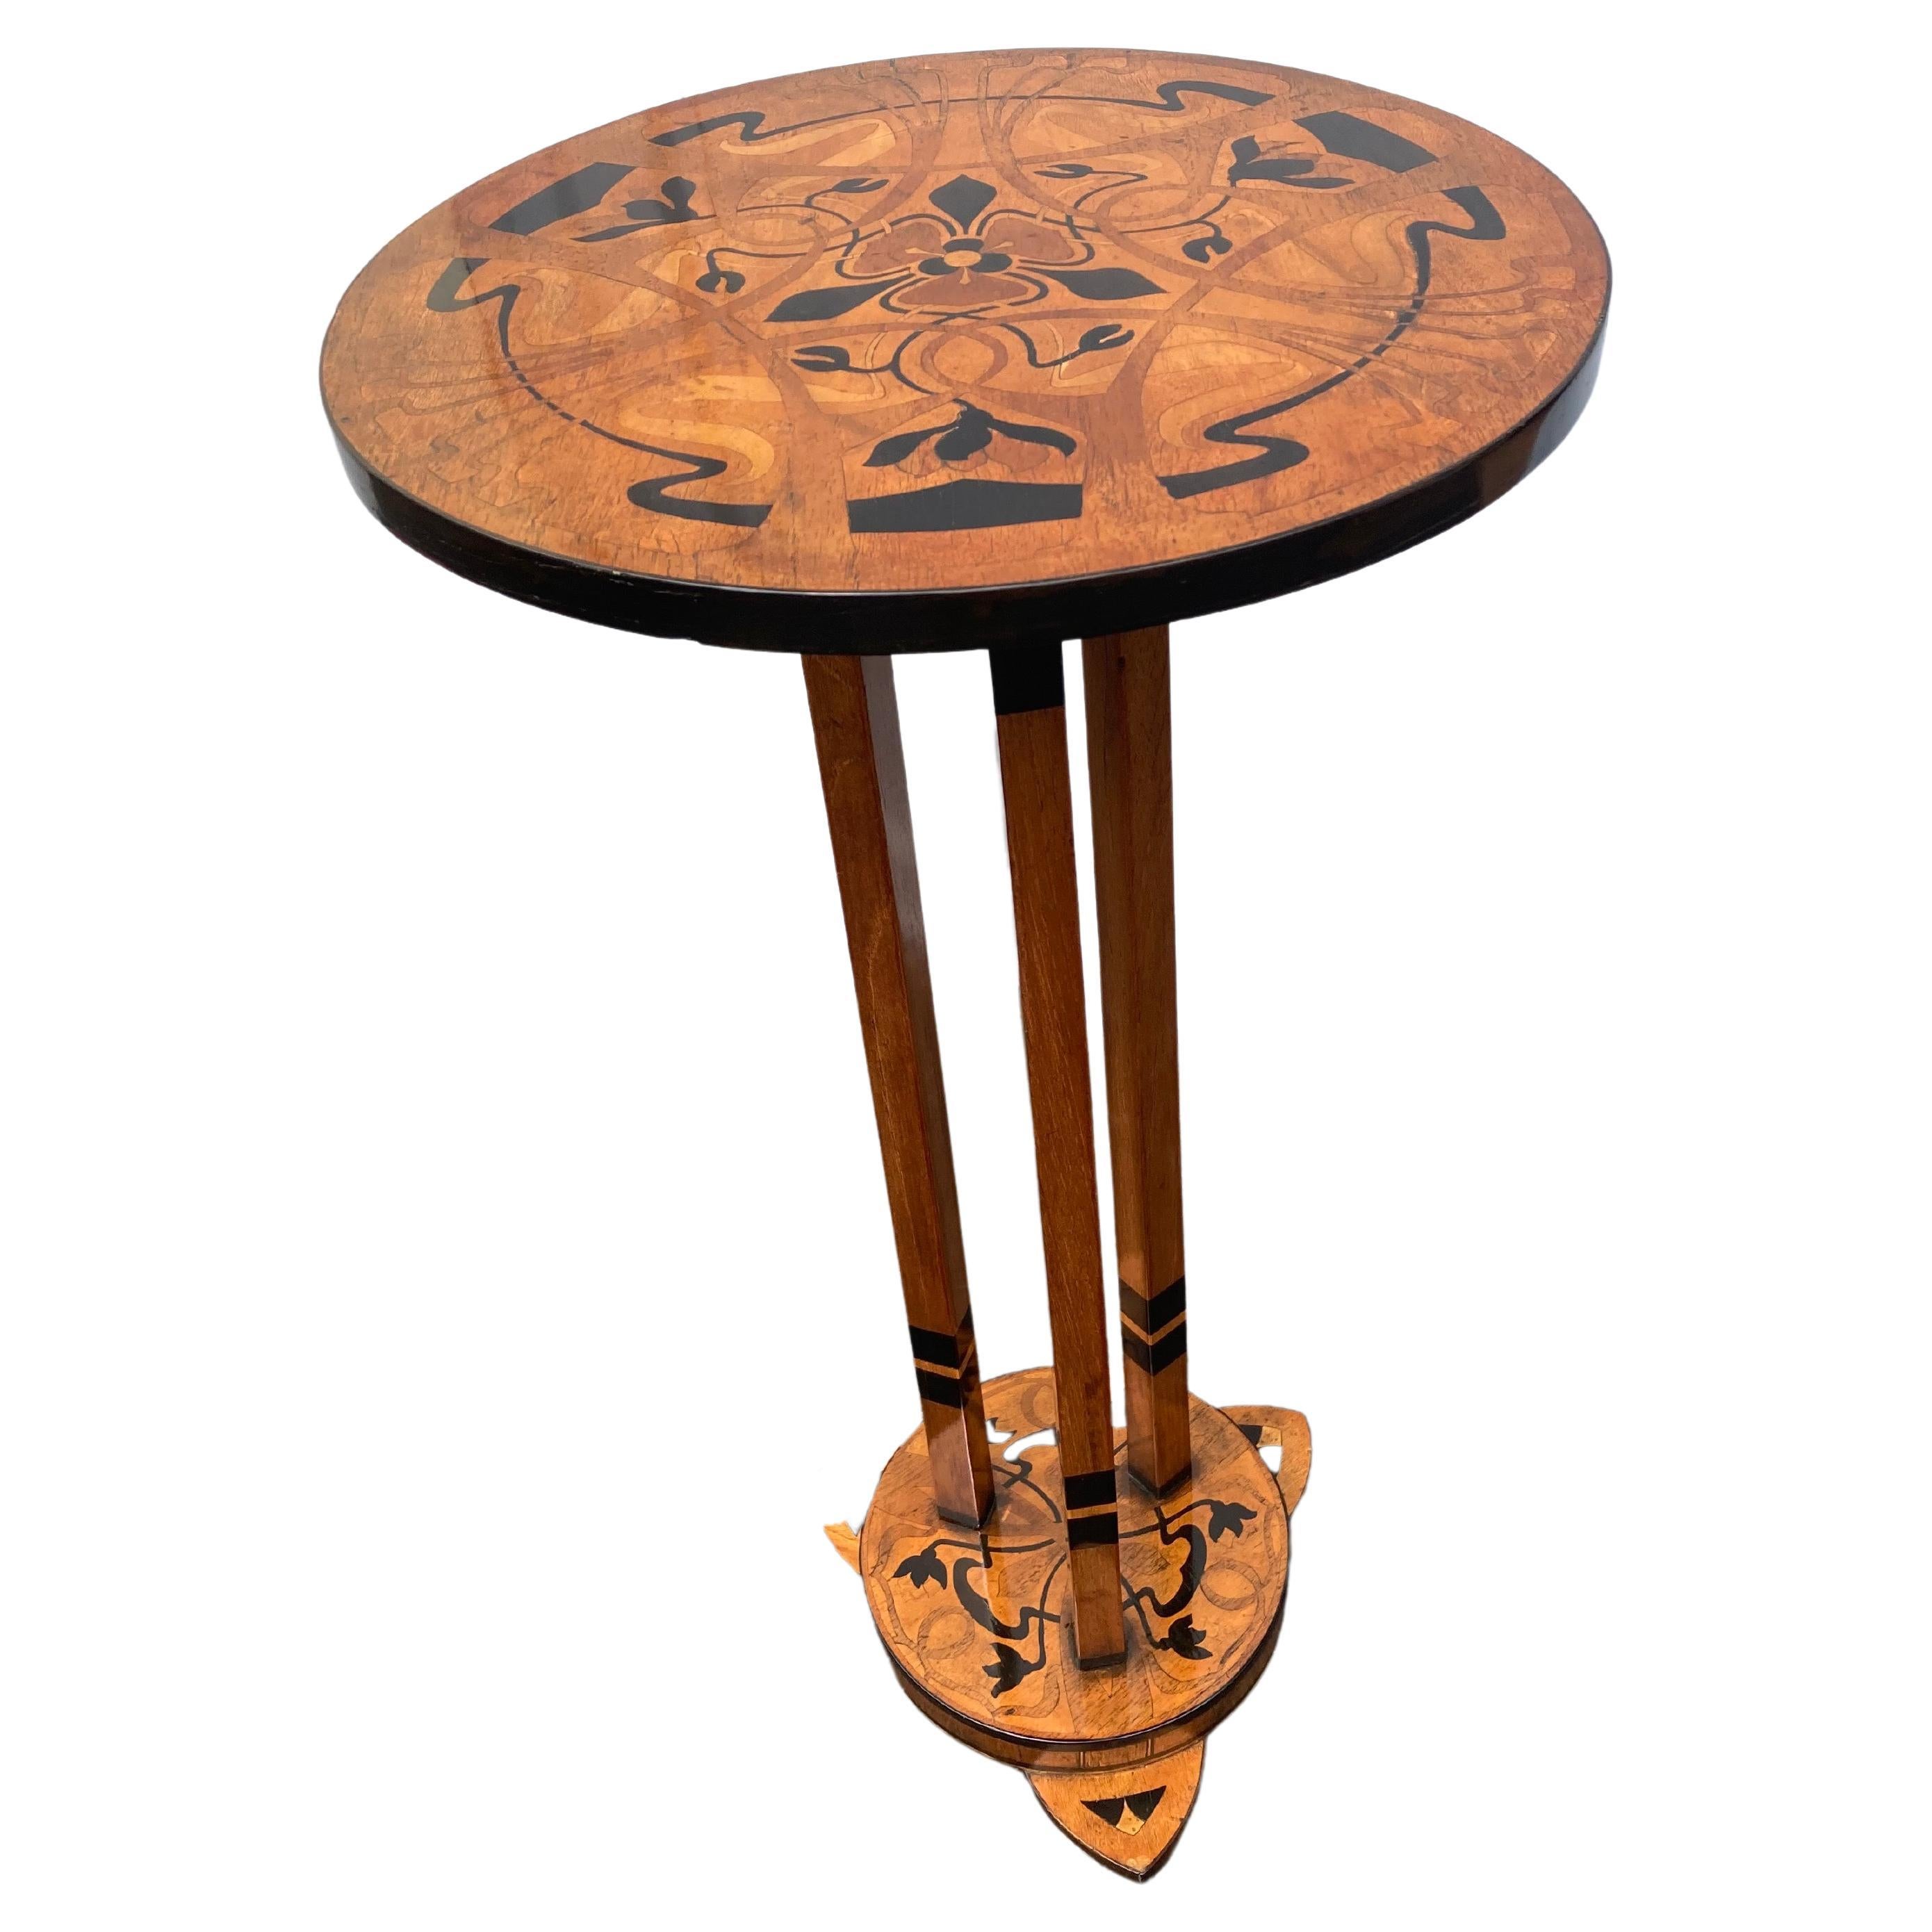 Art Nouveau base, pedestal, probably Italy around 1910 with inlays and black painting. Three sqare columns on shapely base.
The column can be used as a classic flower pedestal, is also suitable for the presentation of various objects. The high